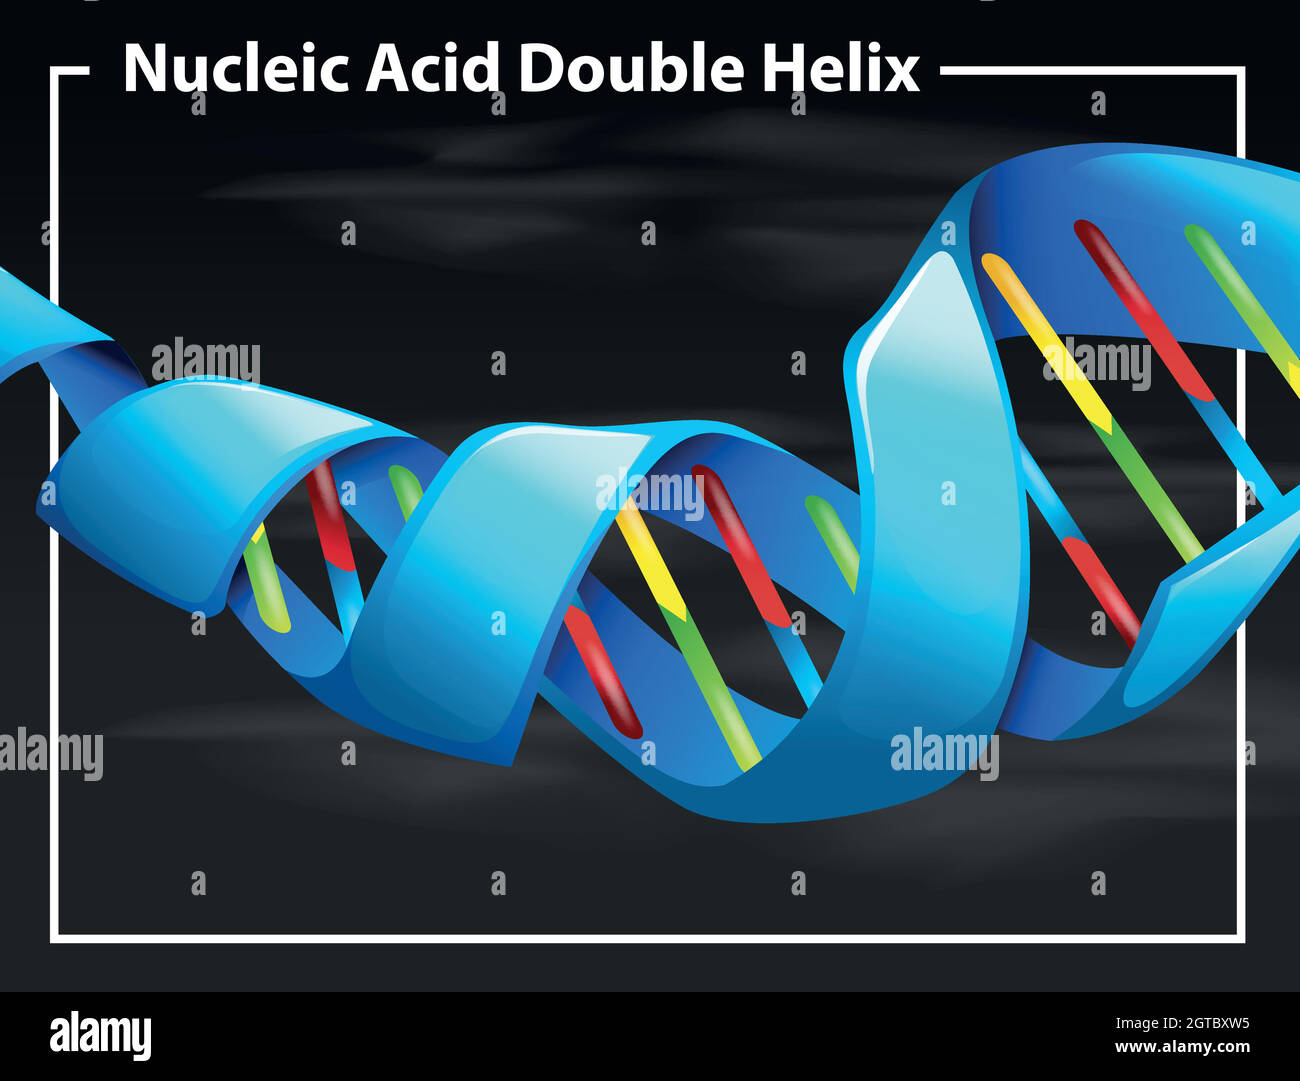 Nucleic acid double helix Stock Vector